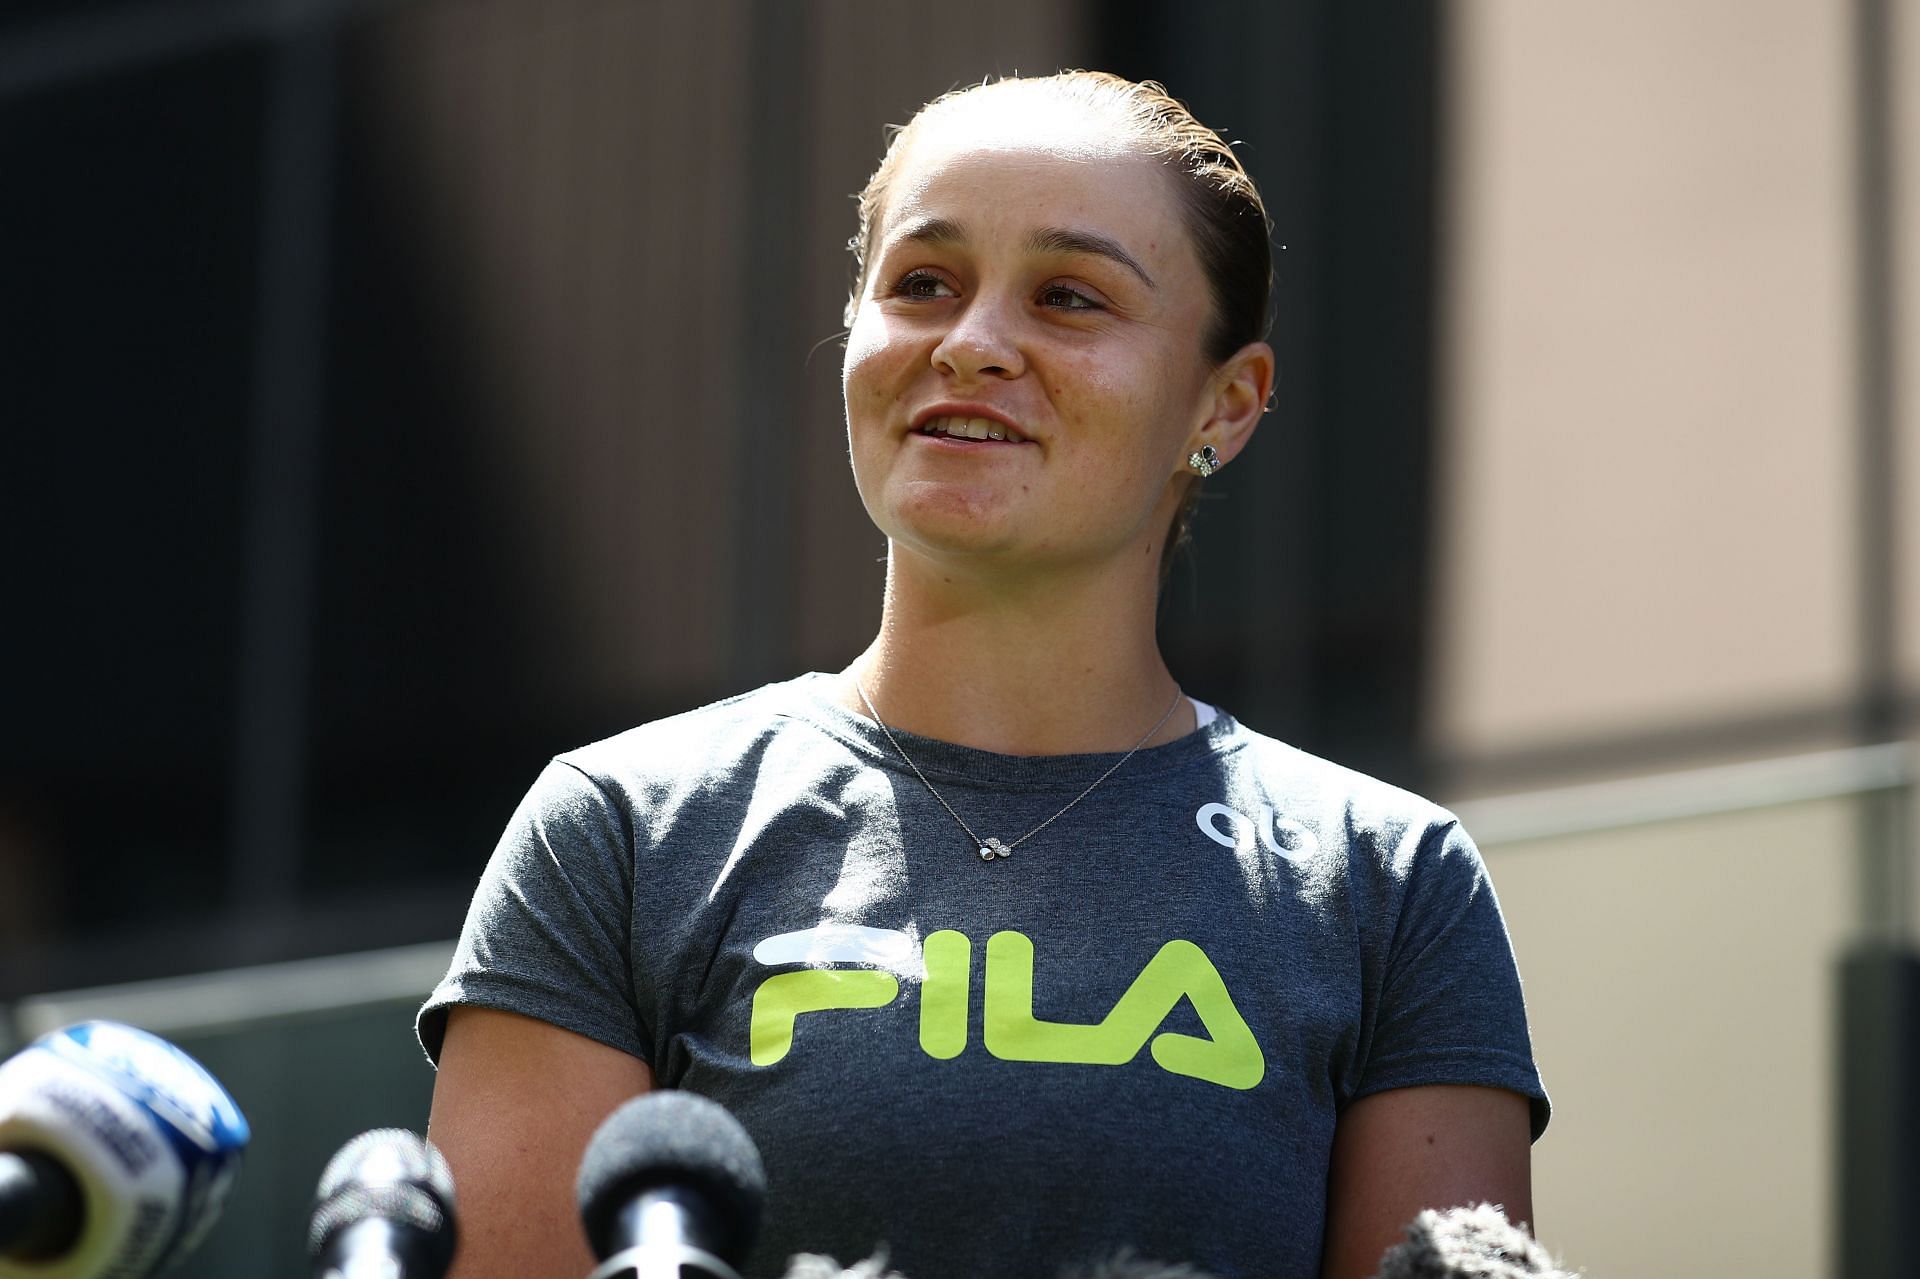 Barty announced her retirement from tennis earlier this year.